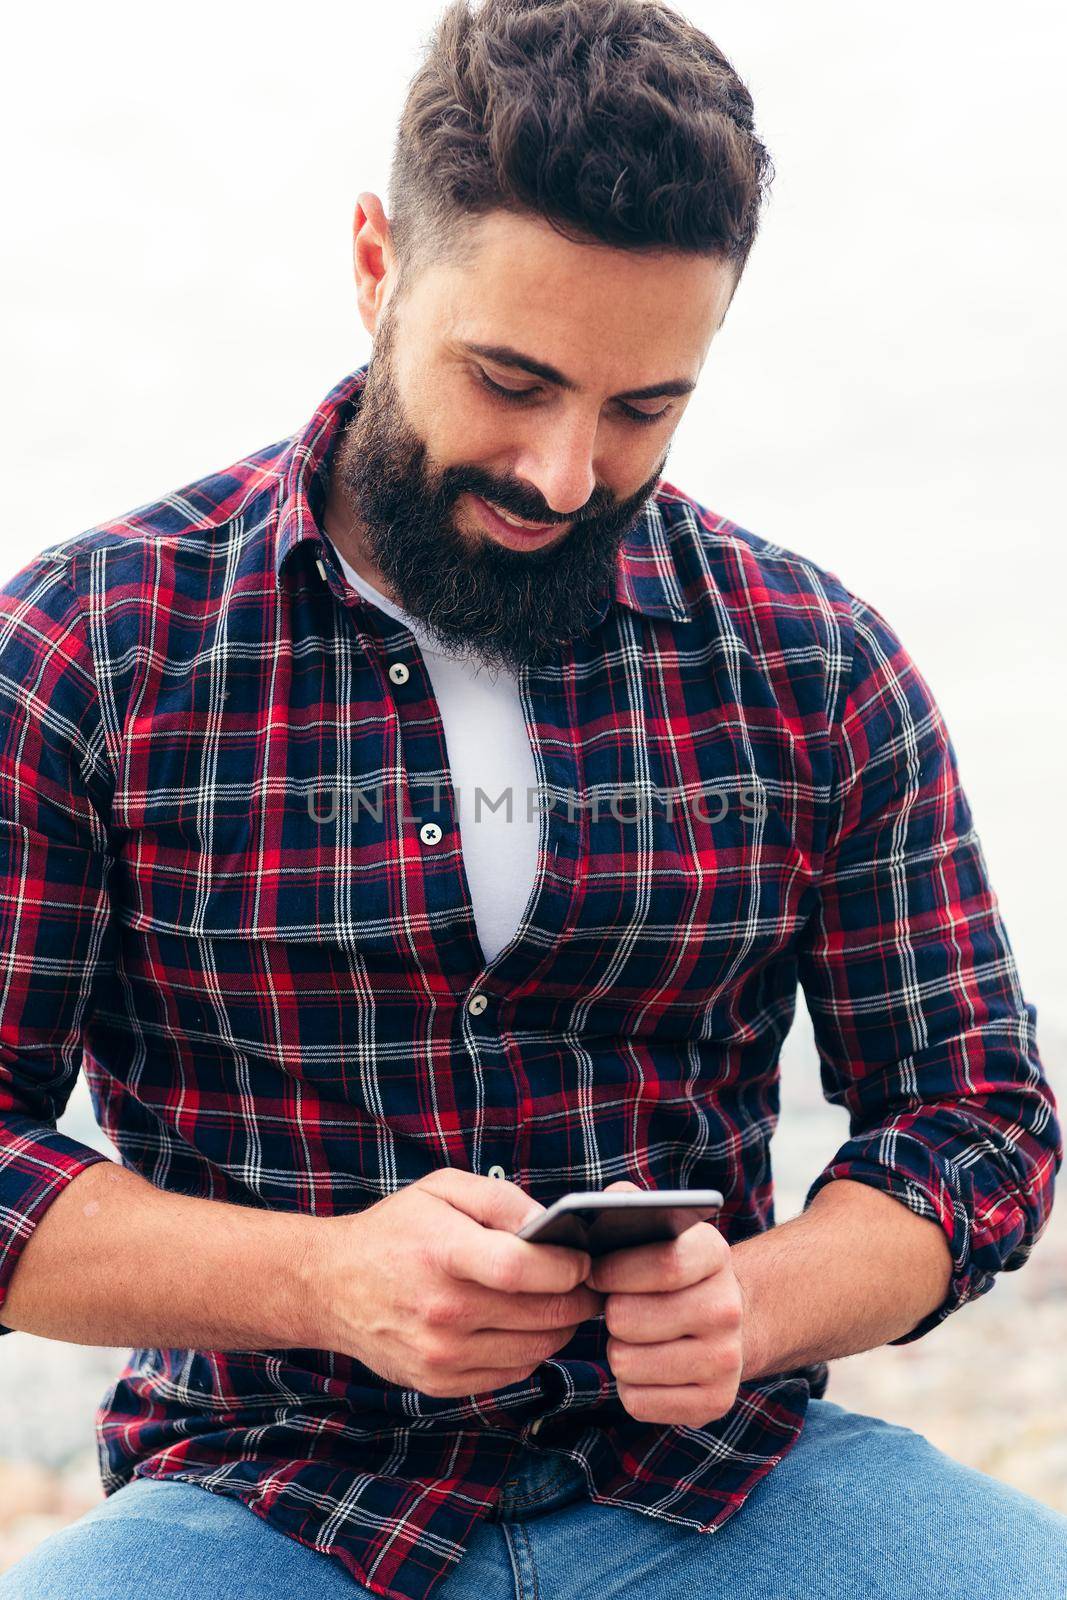 bearded man typing a text message on his phone by raulmelldo